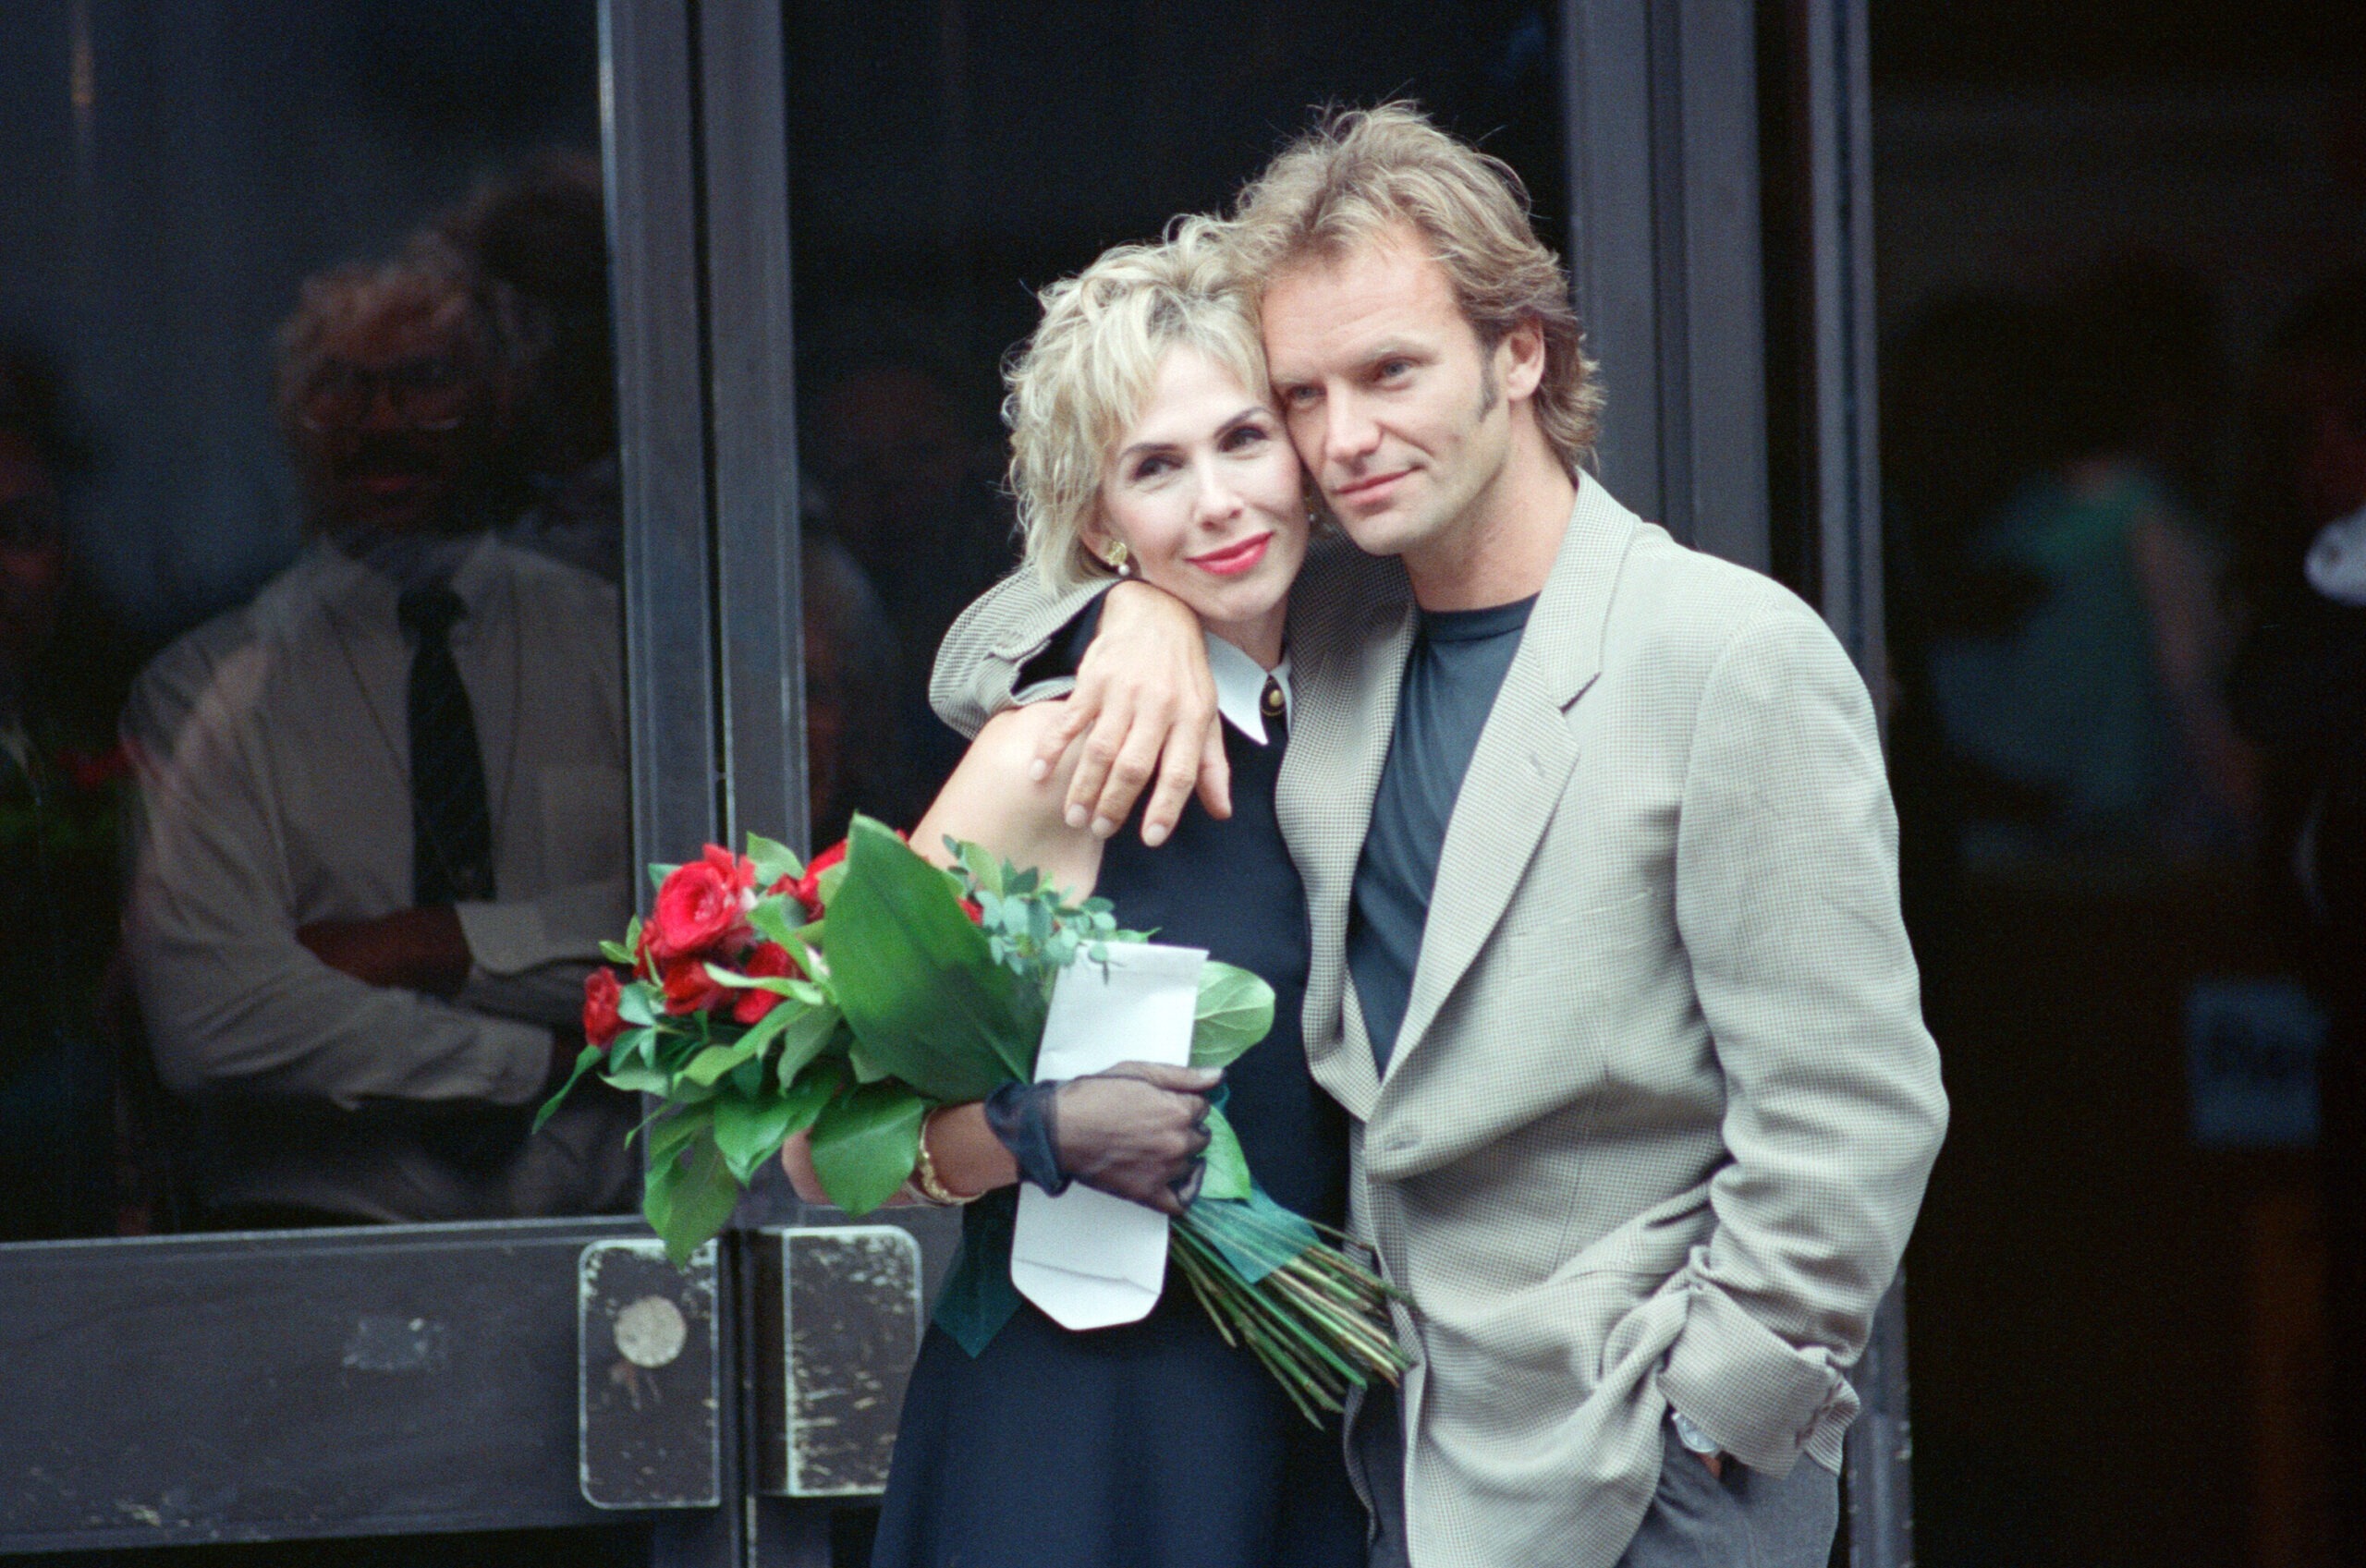 Trudie Styler and Sting outside Camden register office on August 20, 1992 in London. | Source: Getty Images